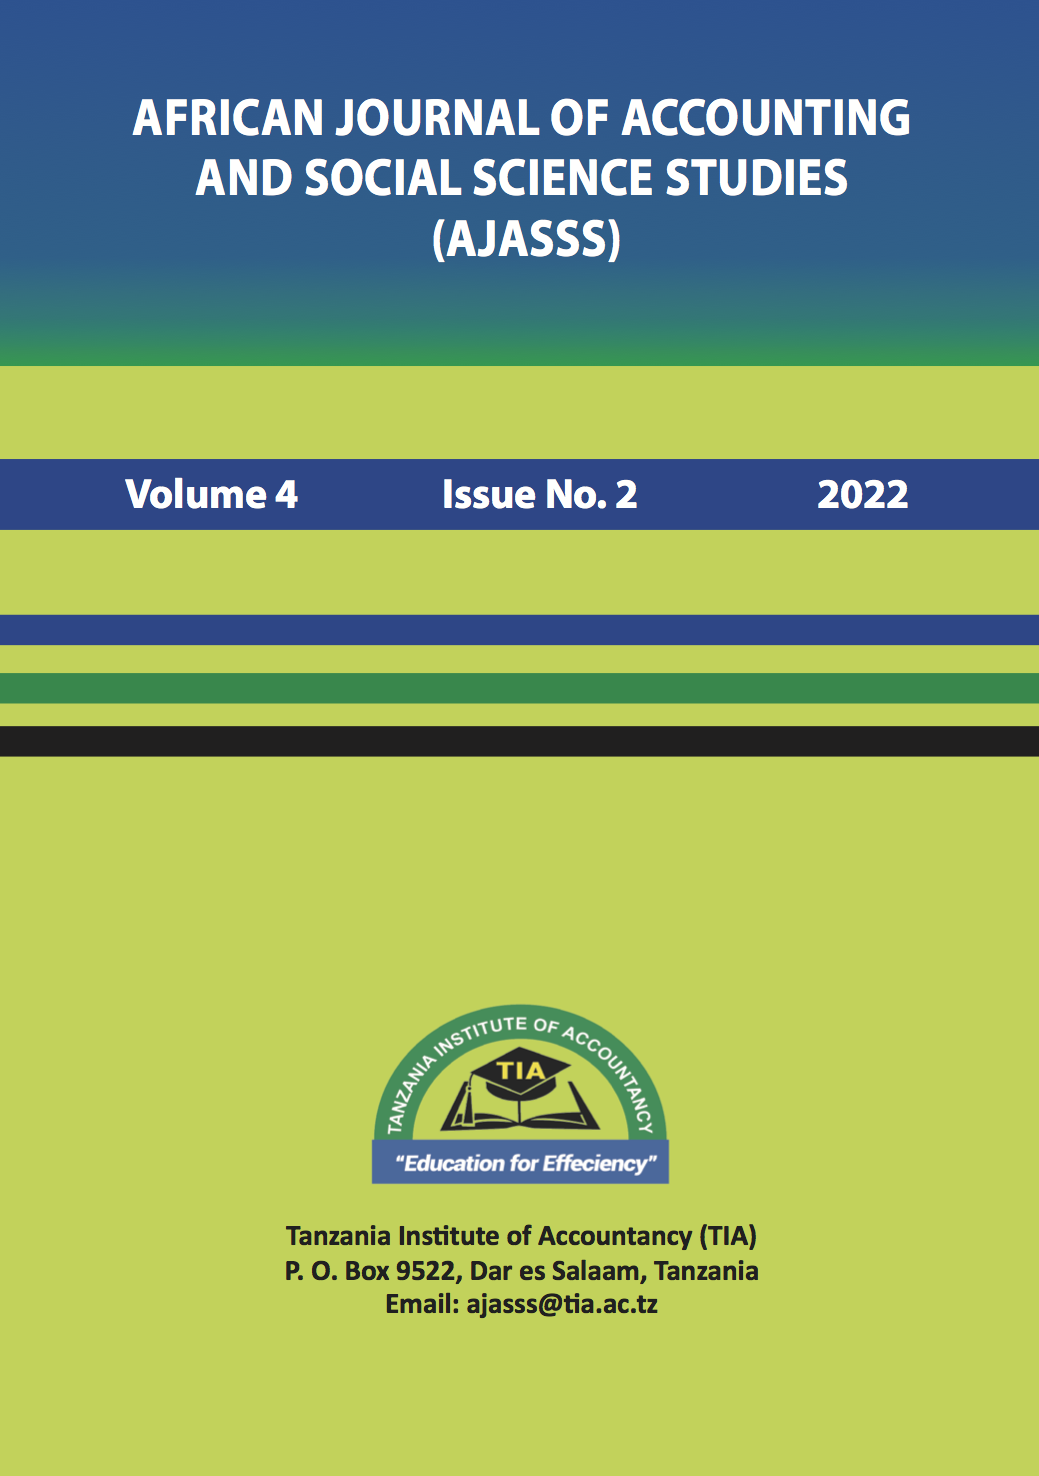 African Journal of Accounting and Social Science Studies